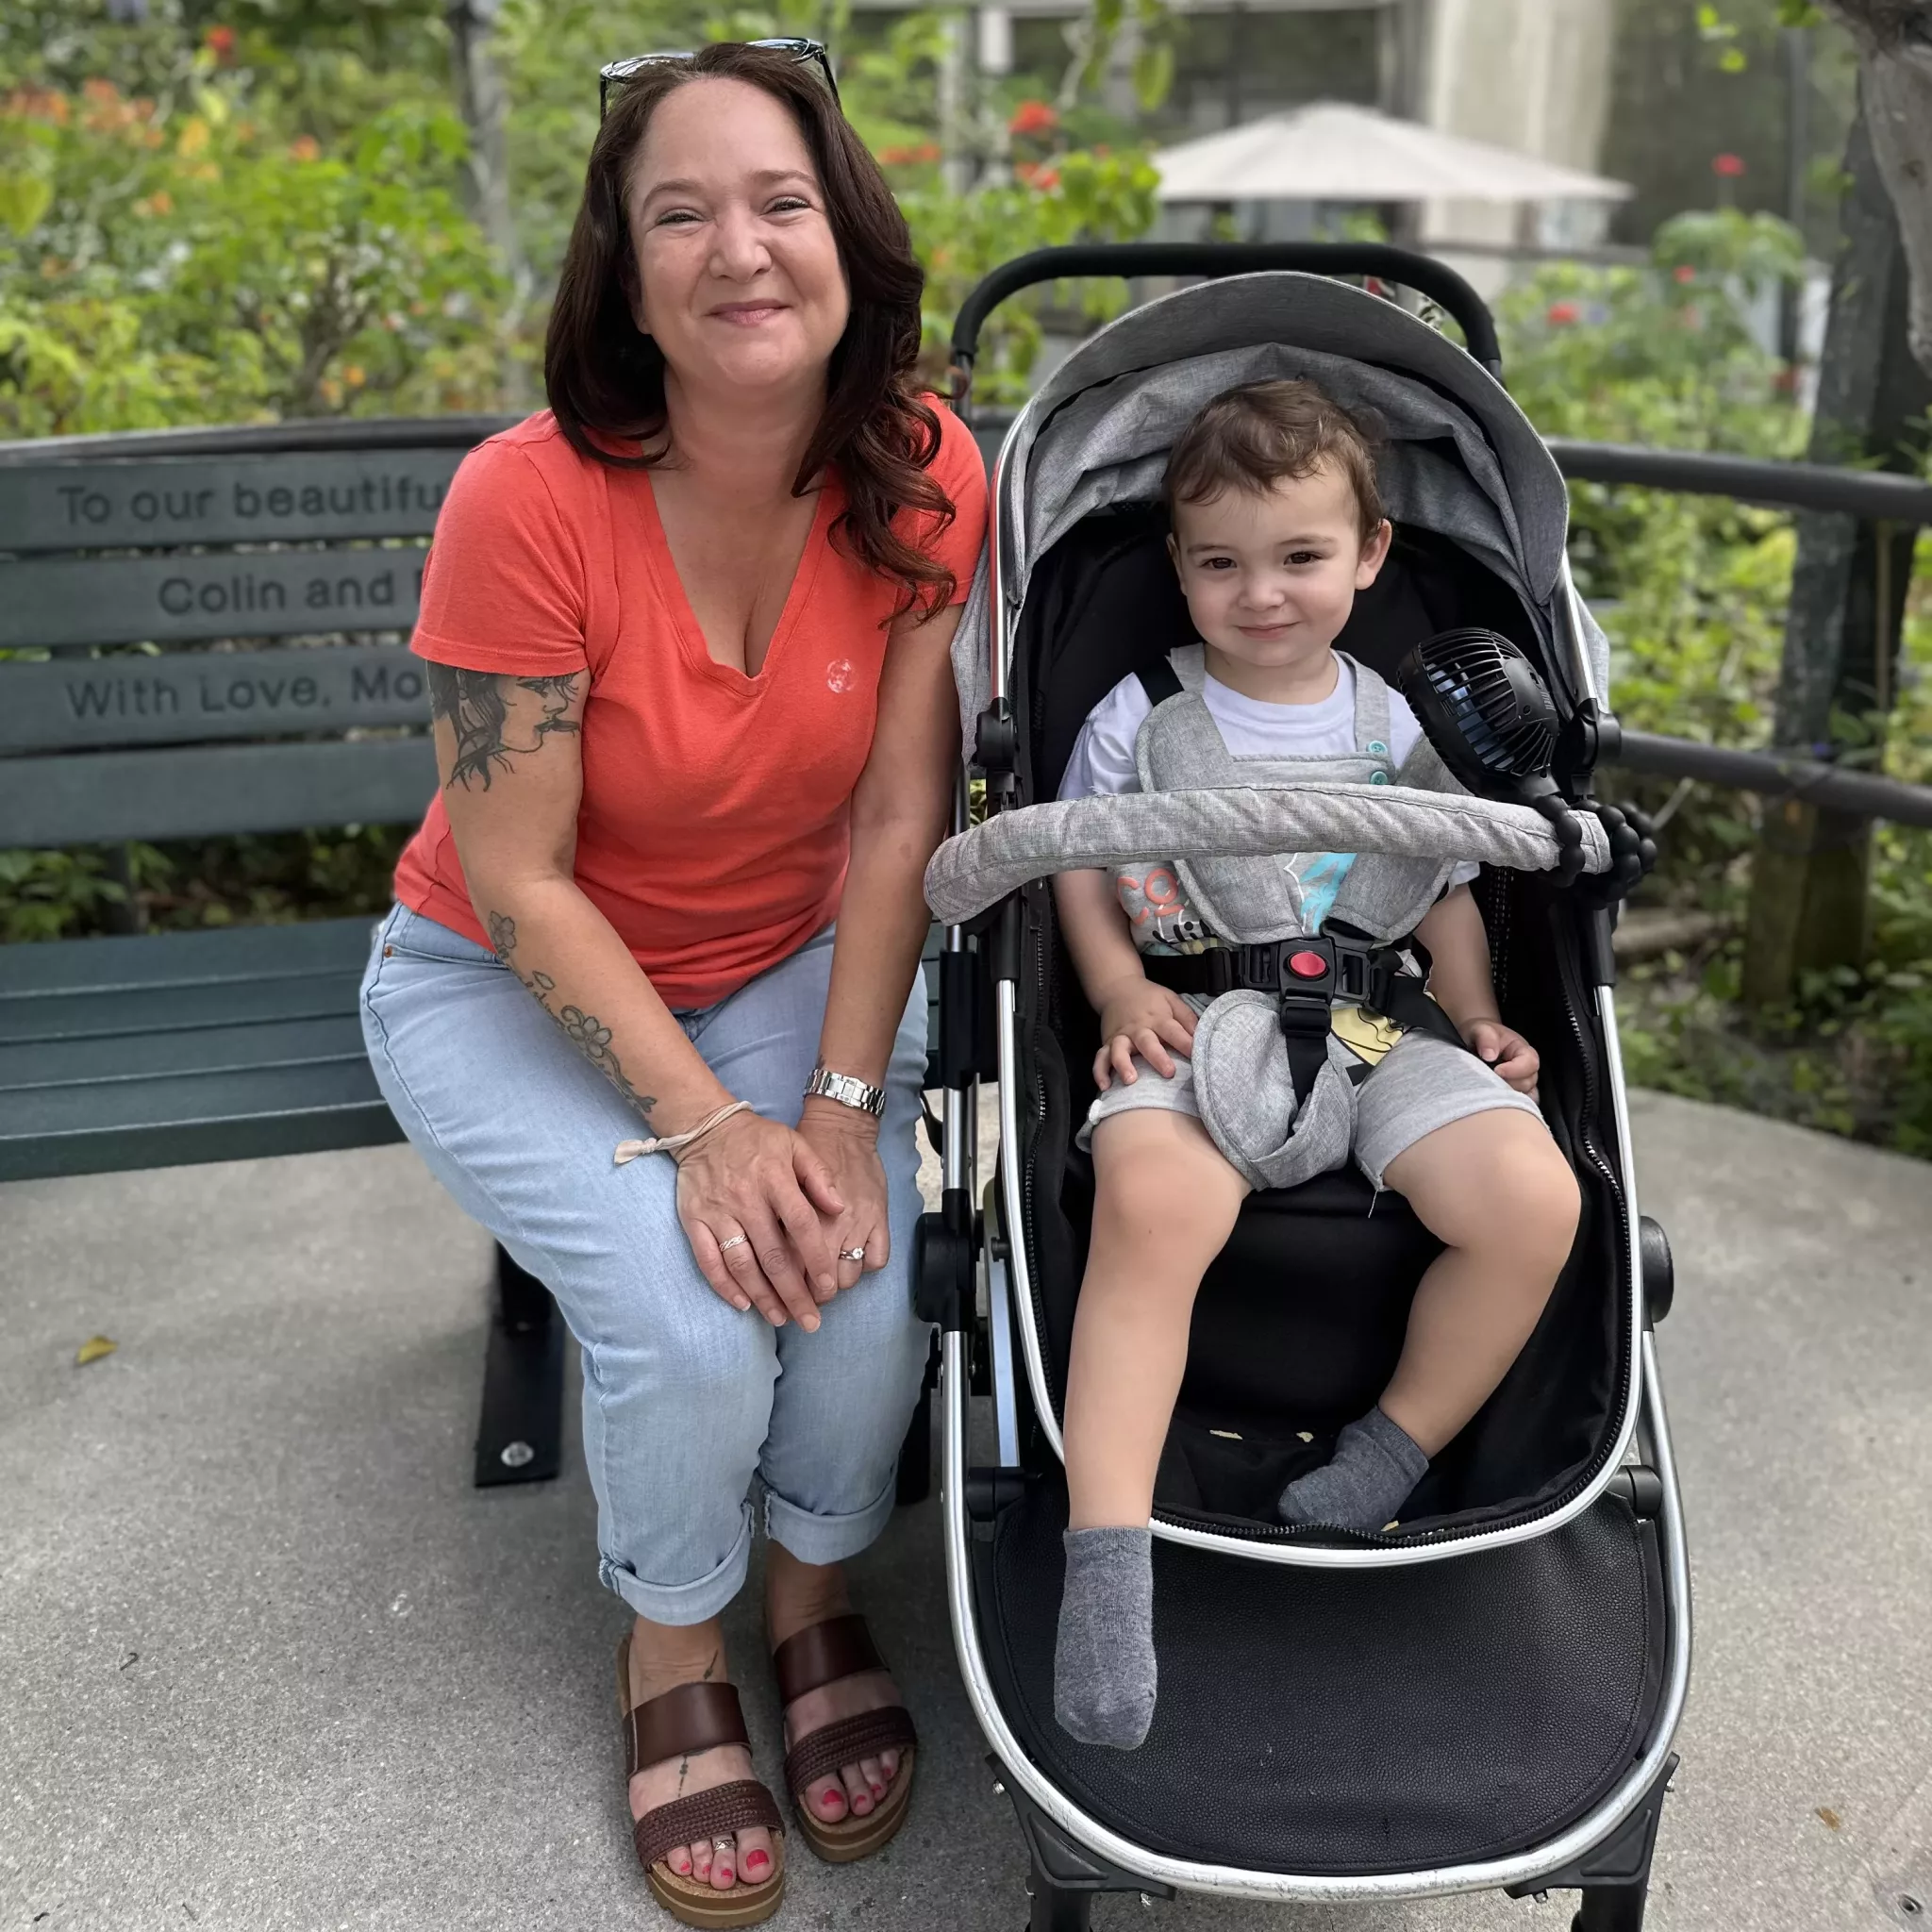 woman wearing LEVIS jeans, an orange tee shirt and REED High Vista Sandals with her grandson in a Stroller at Butterfly World in Coconut Creek Florida